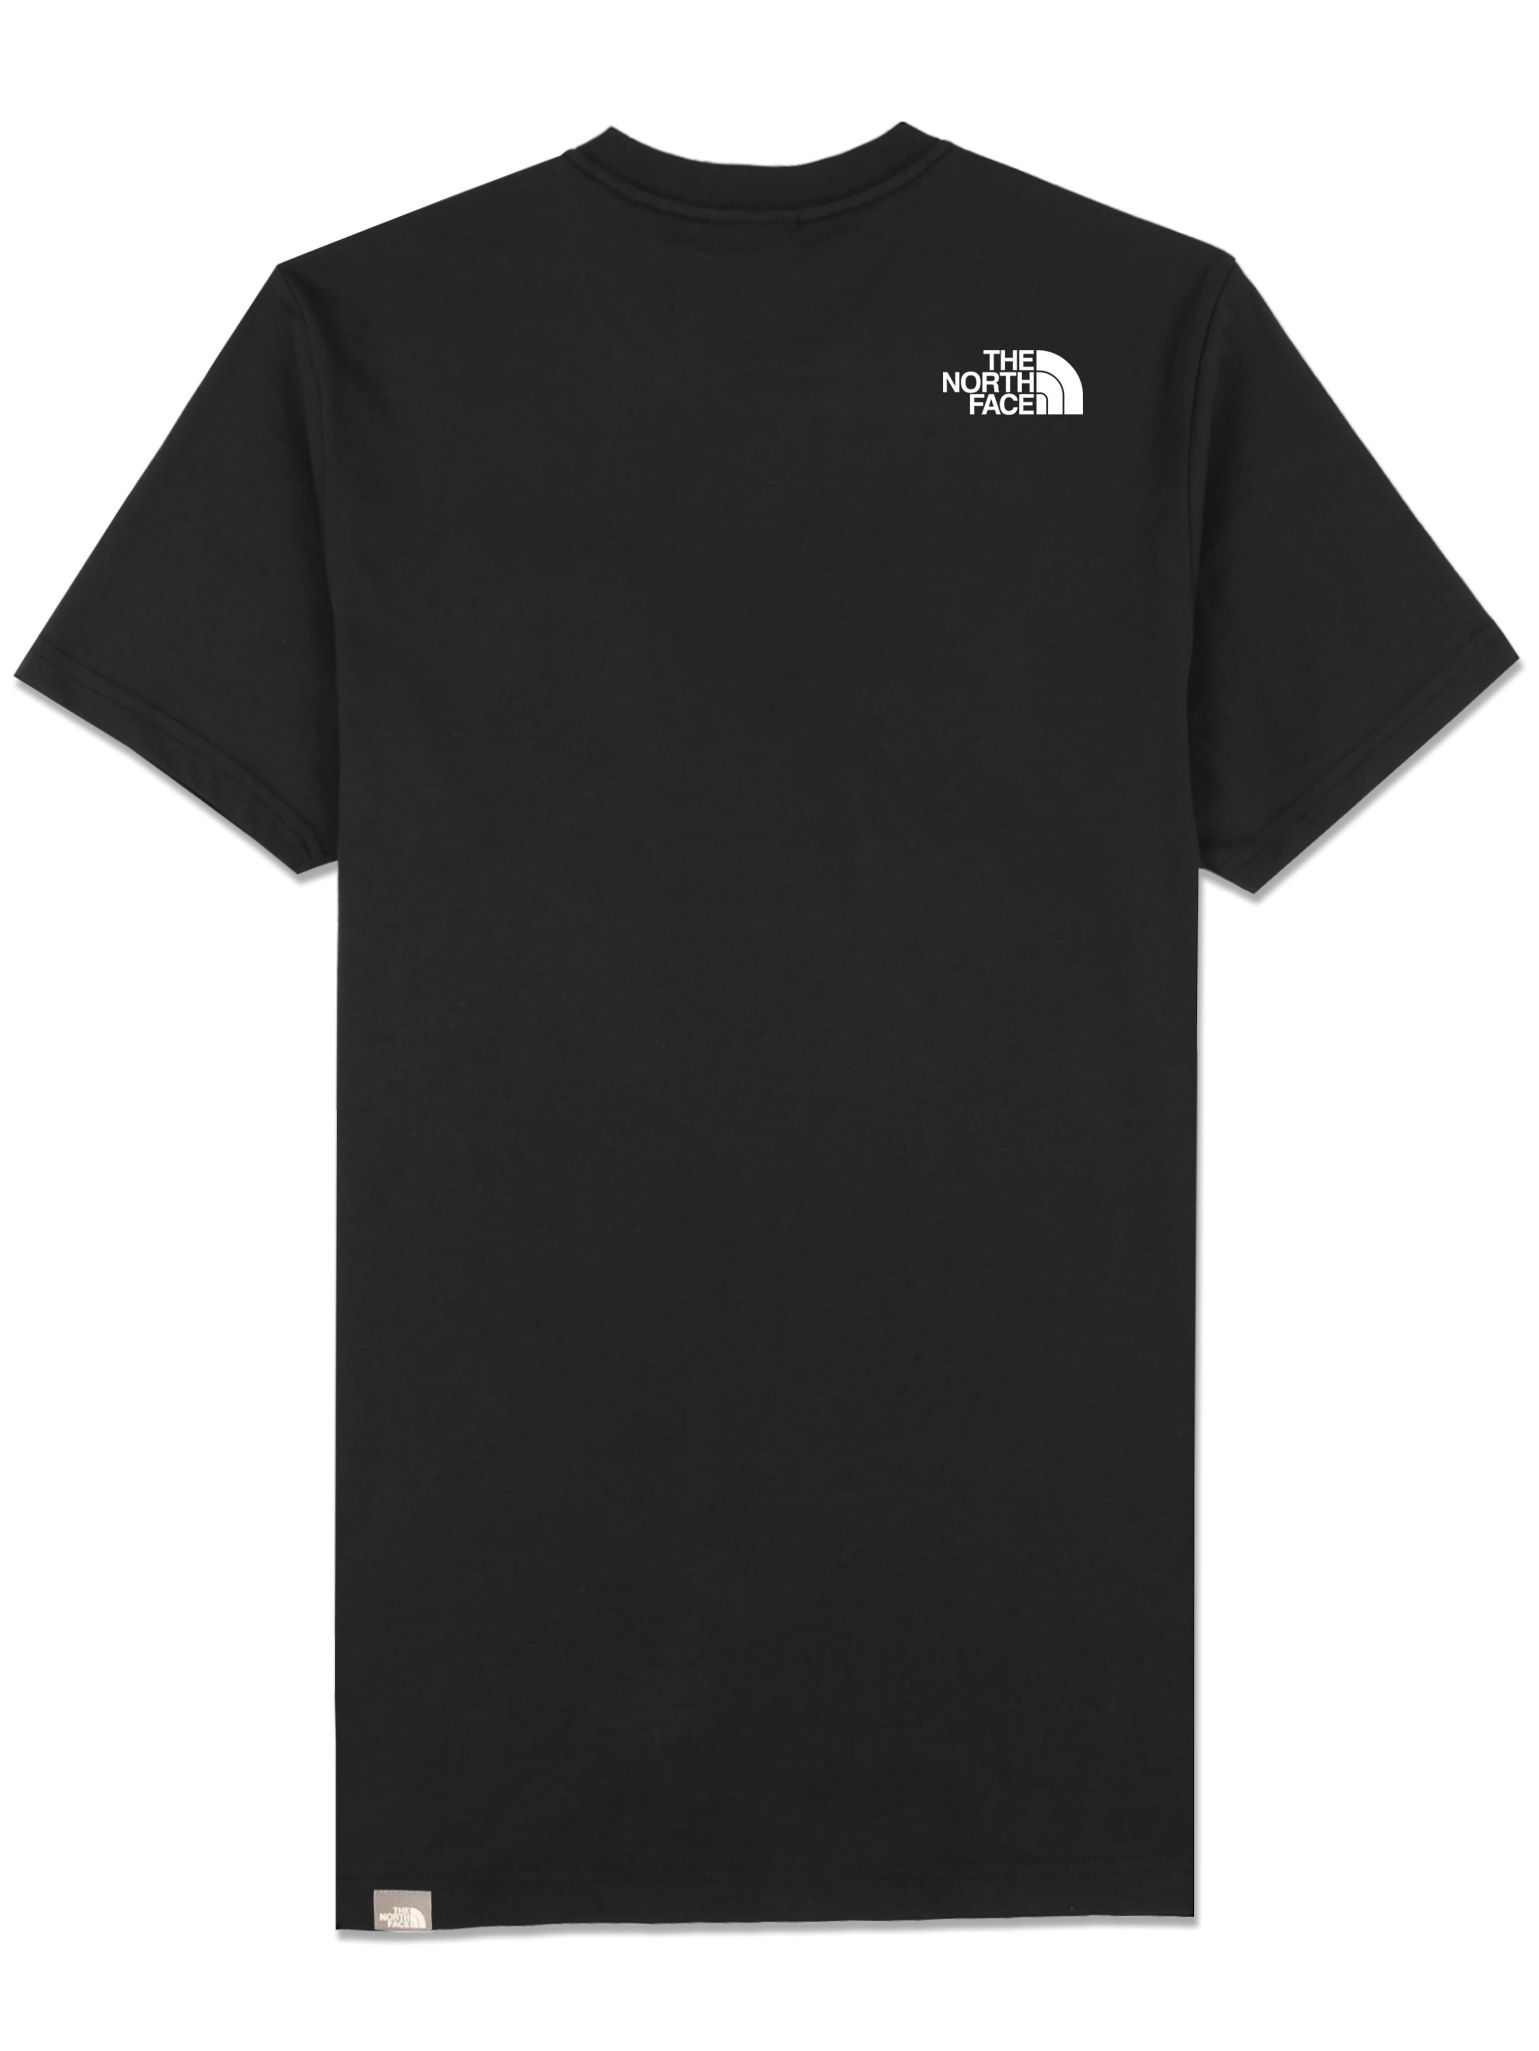 The North Face Men's Simple Dome T-Shirt in Black | Dapper Street